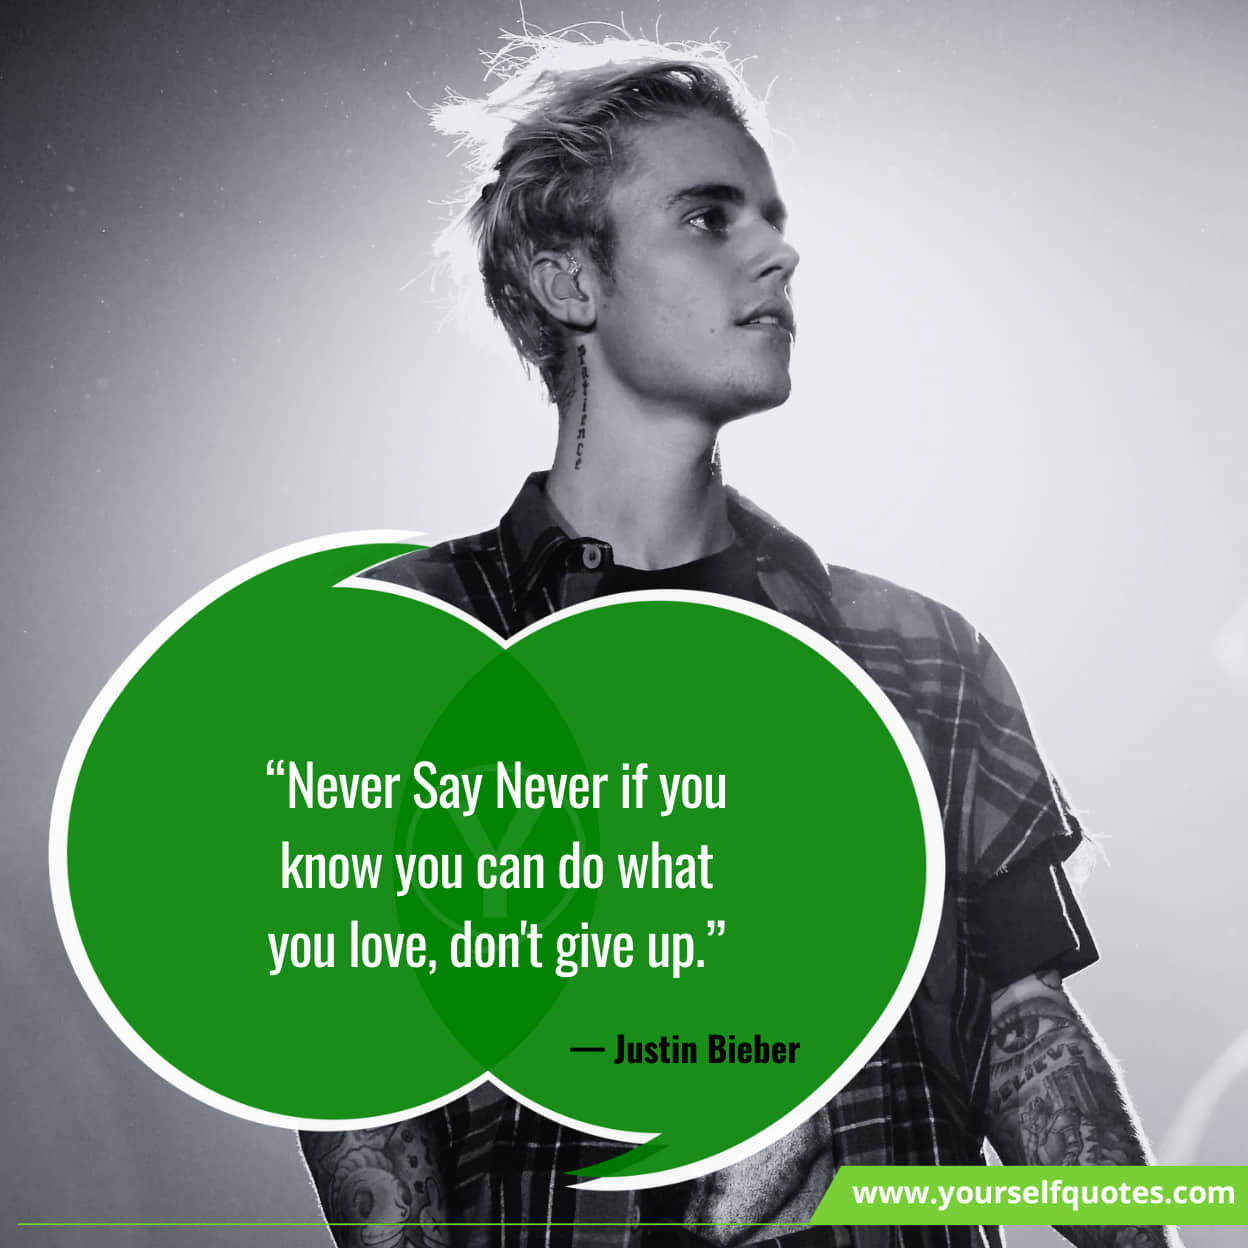 justin bieber 2022 swag quotes